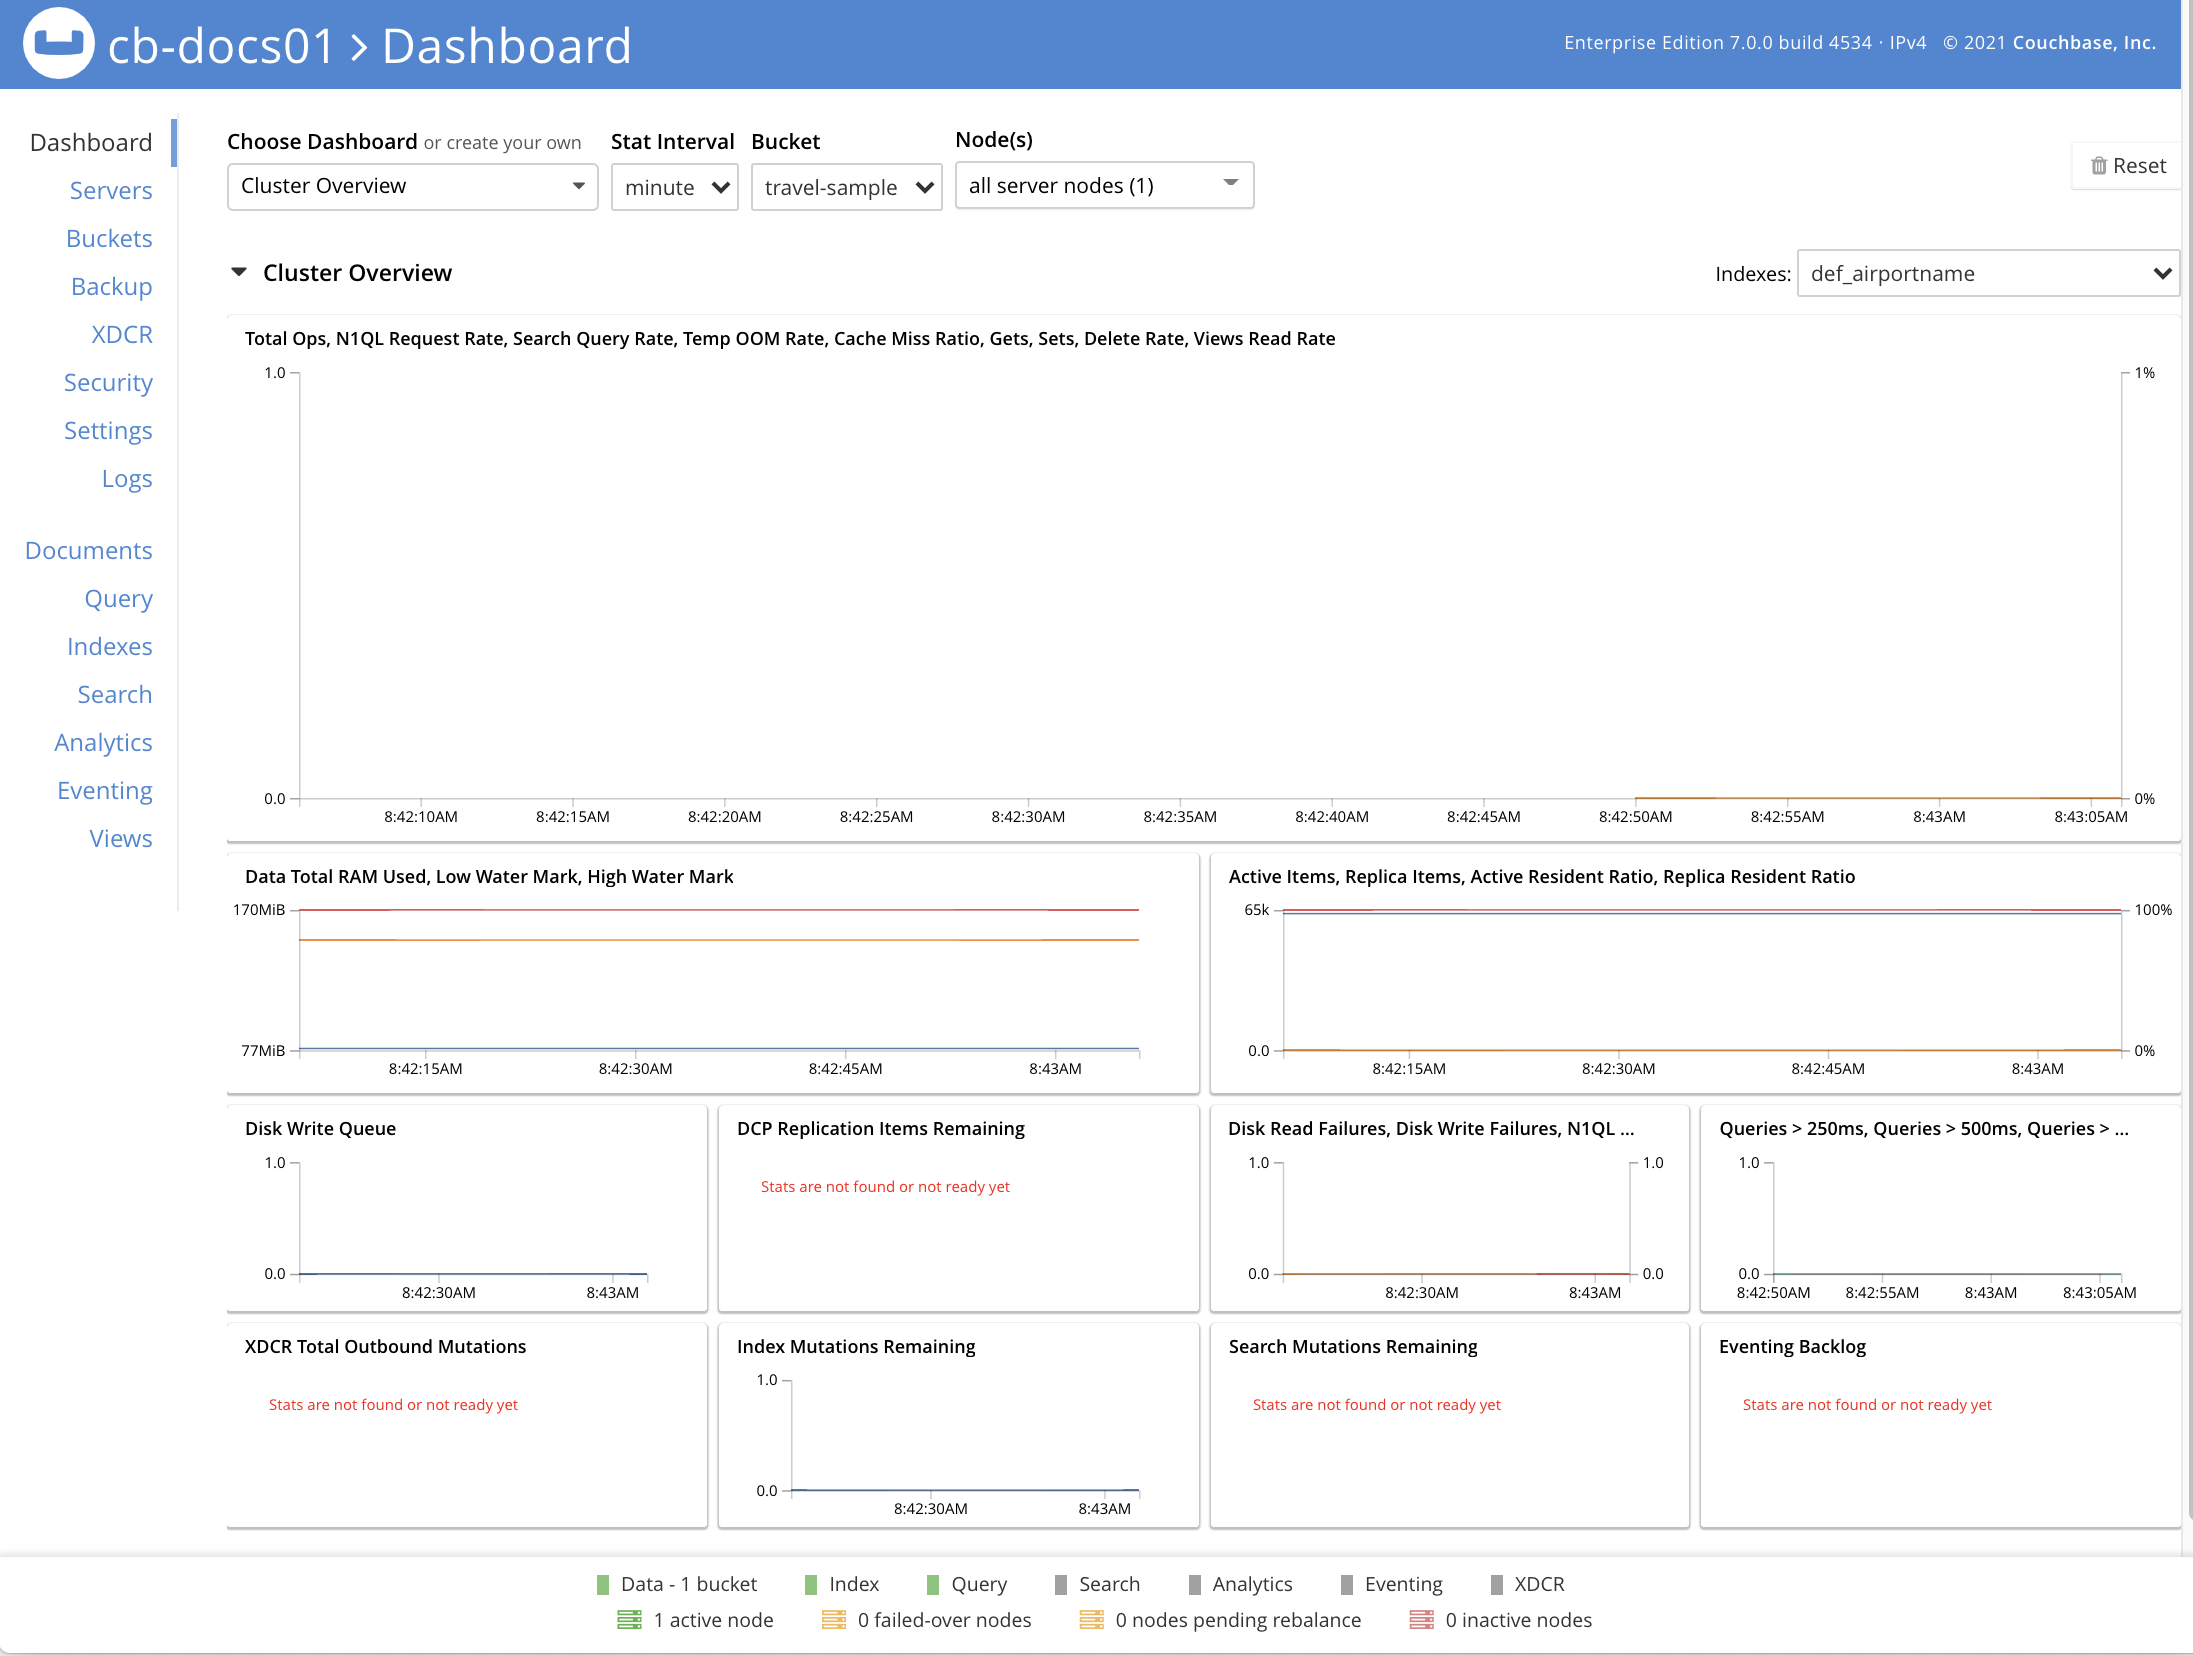 The Cluster Dashboard